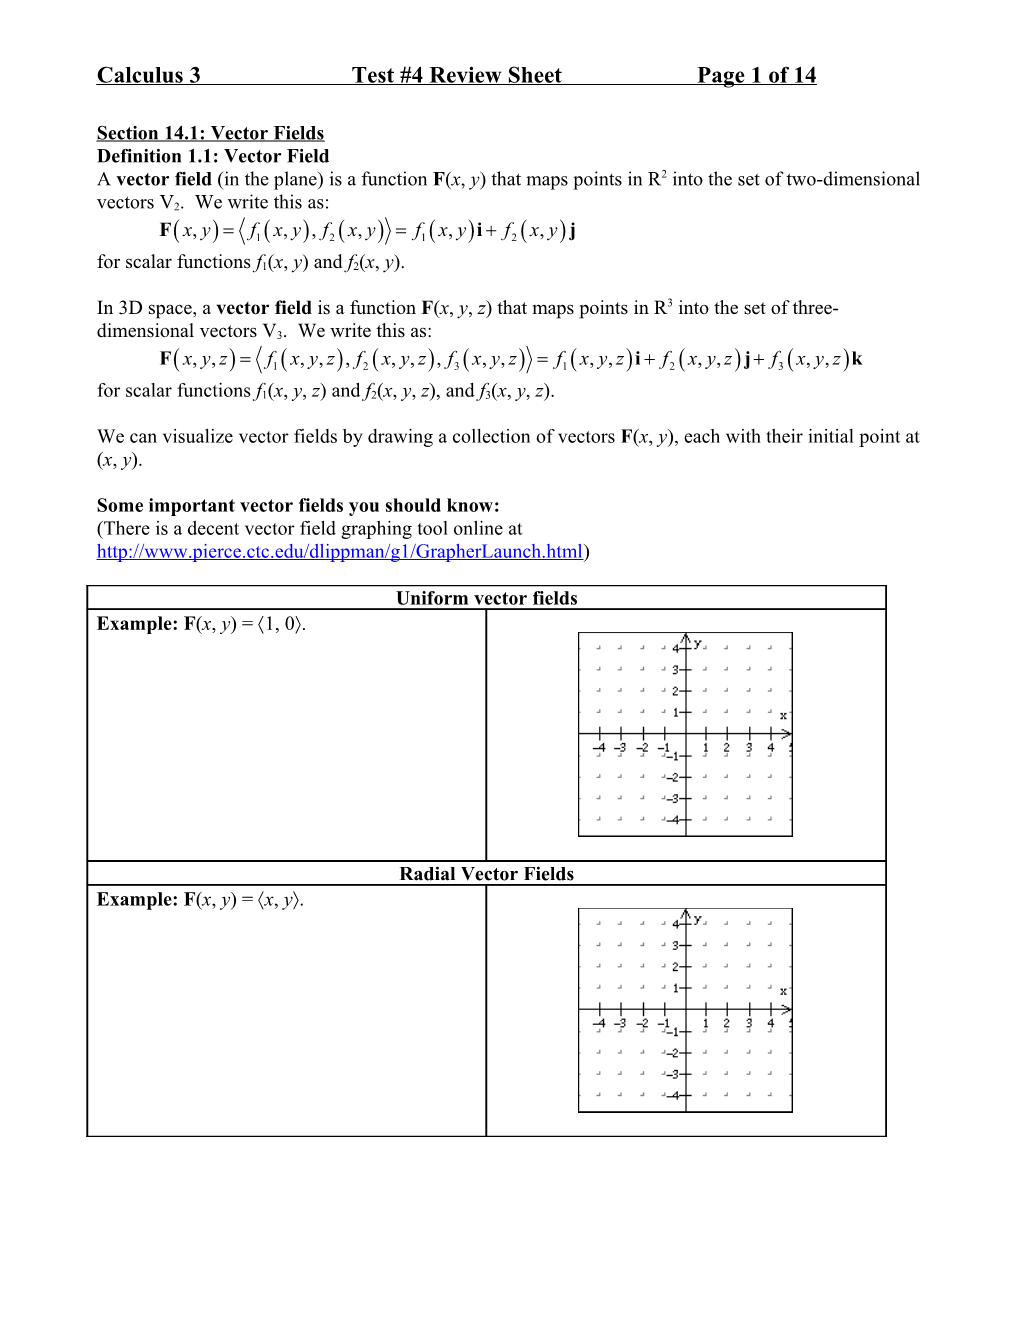 Calculus 3 Test #4 Review, Spring 2009